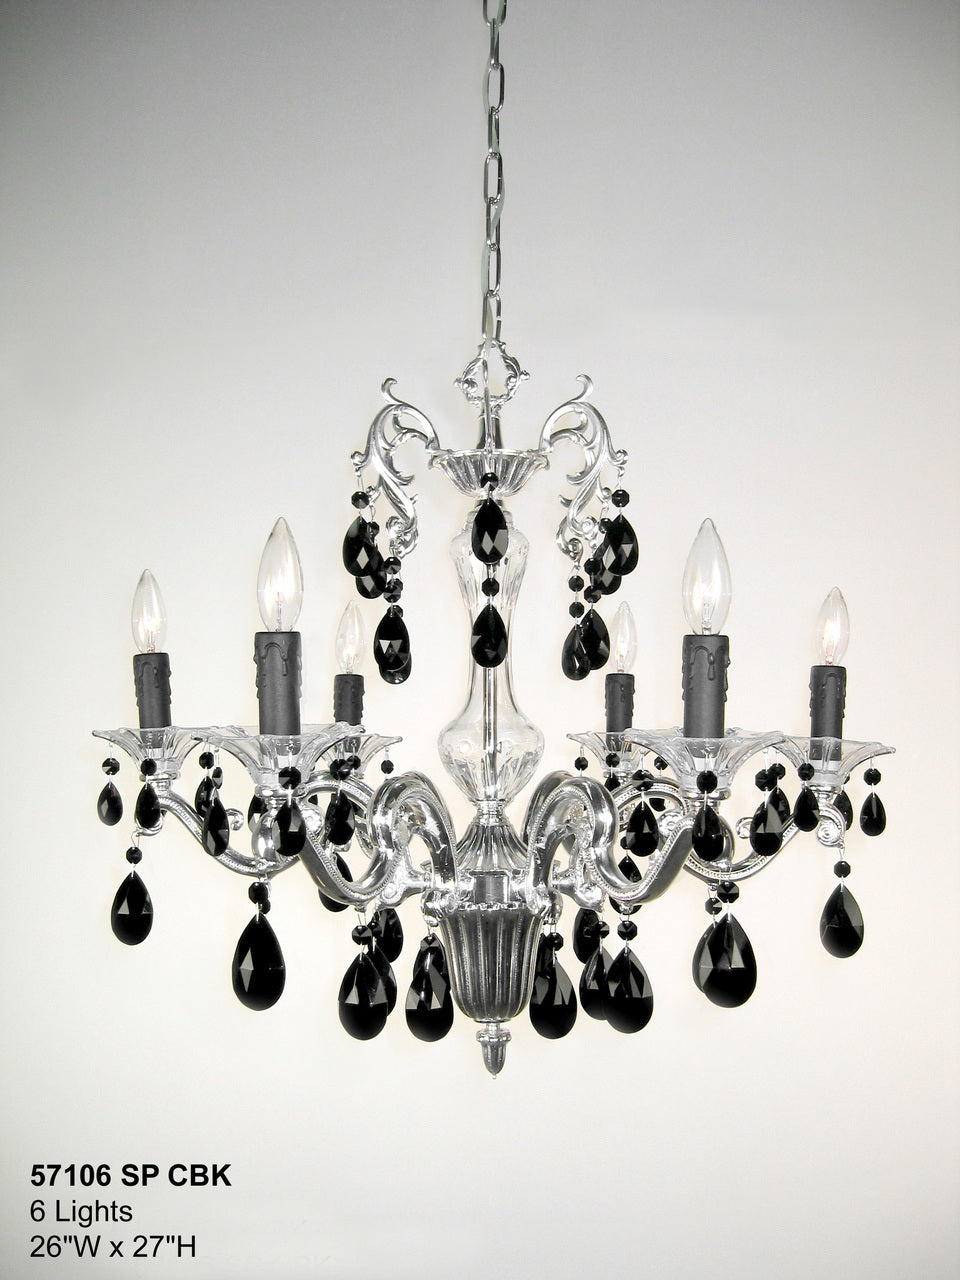 Classic Lighting 57106 SP CBK Via Firenze Crystal Chandelier in Silver (Imported from Spain)